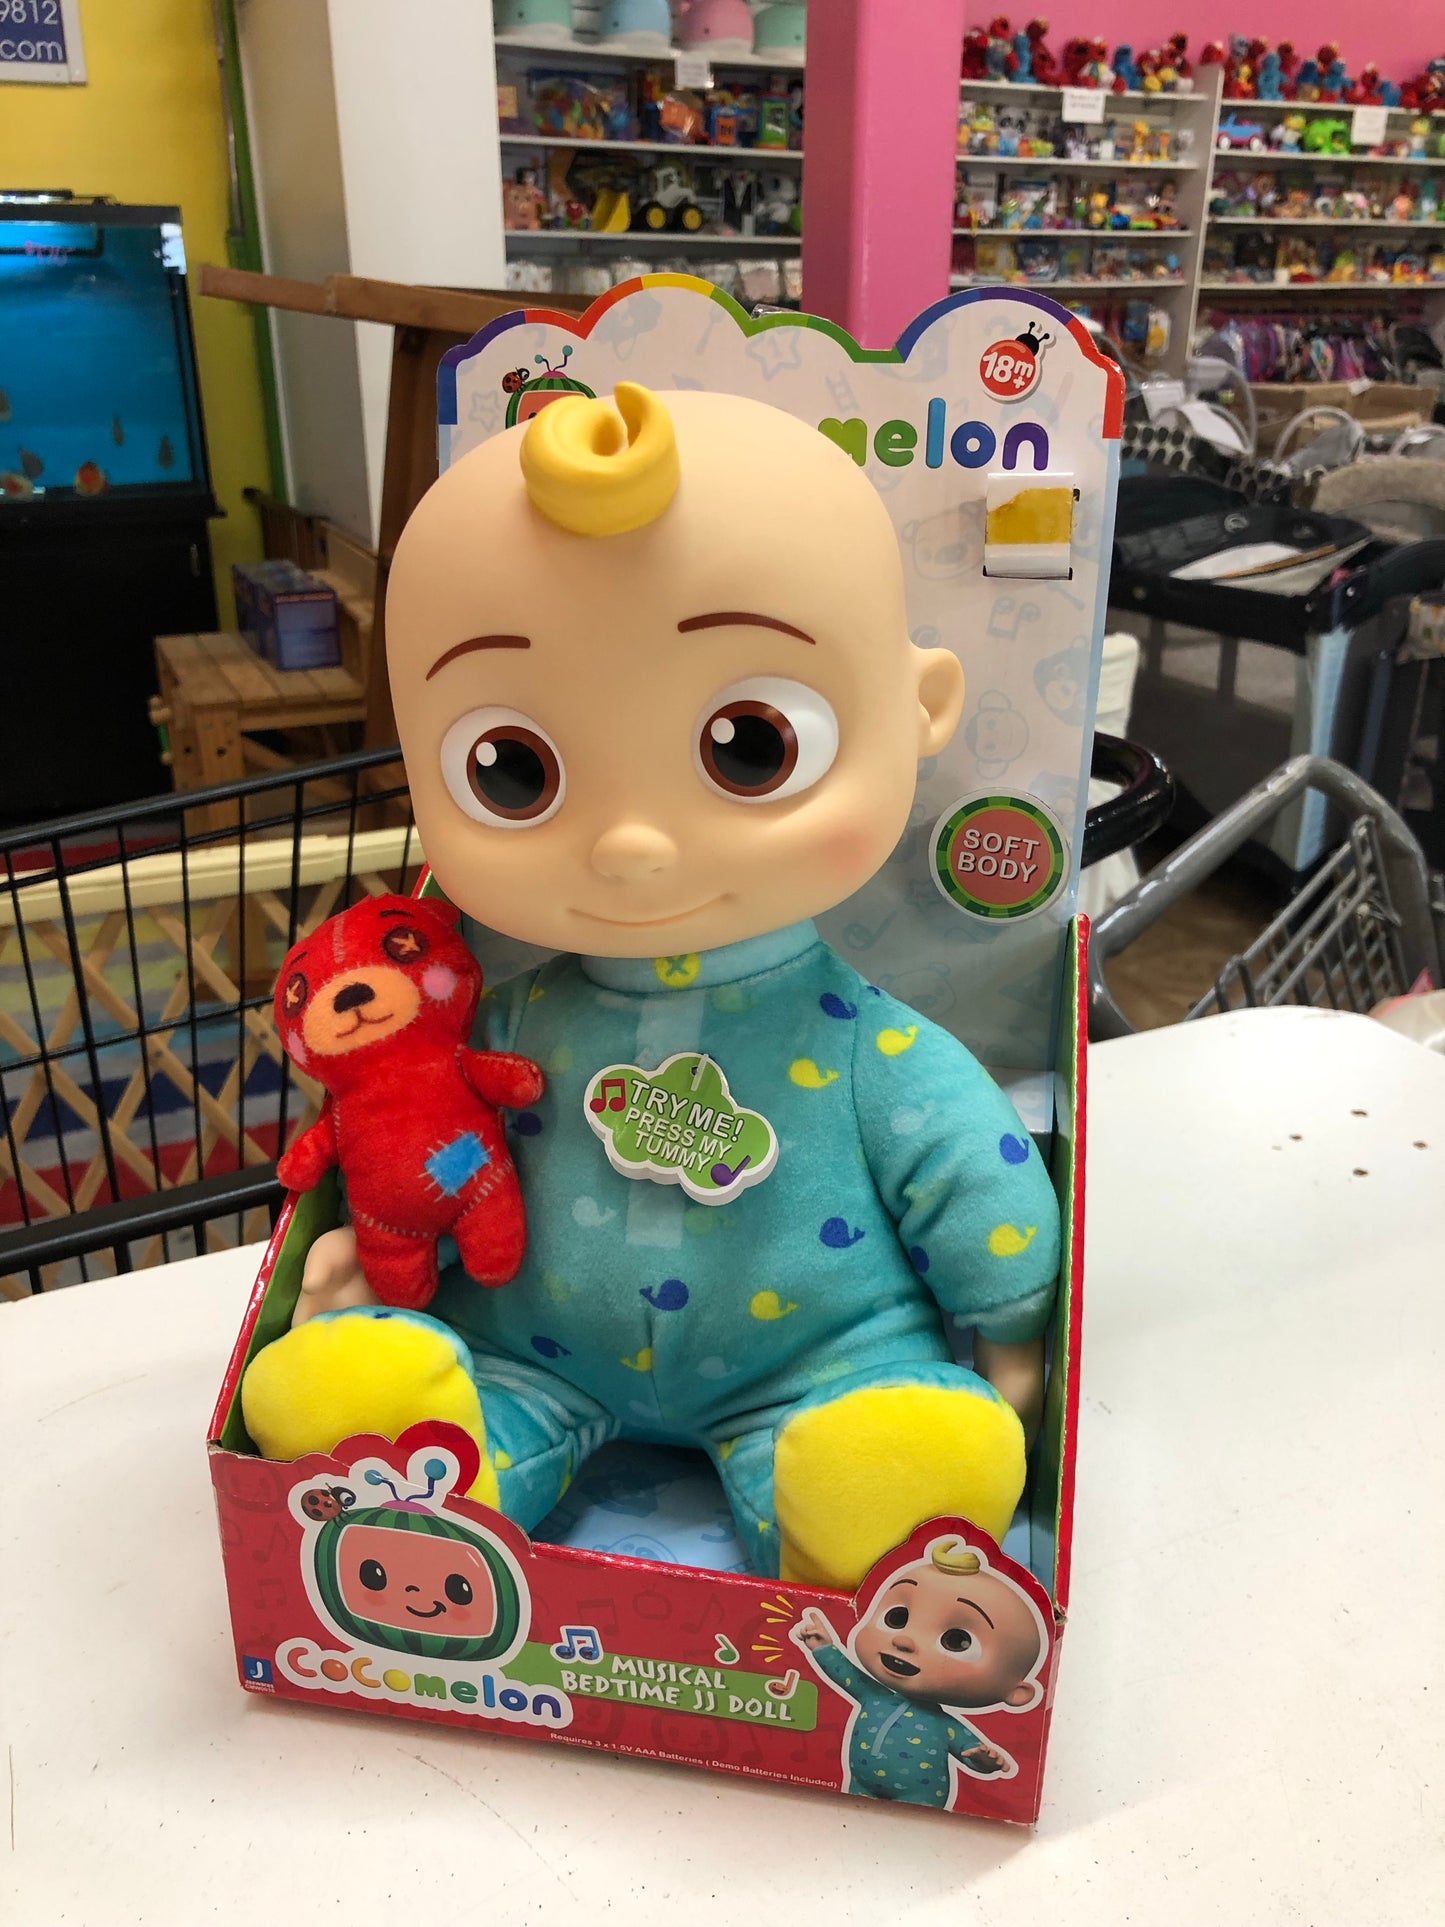 New Cocomelon Musical Bedtime JJ Doll